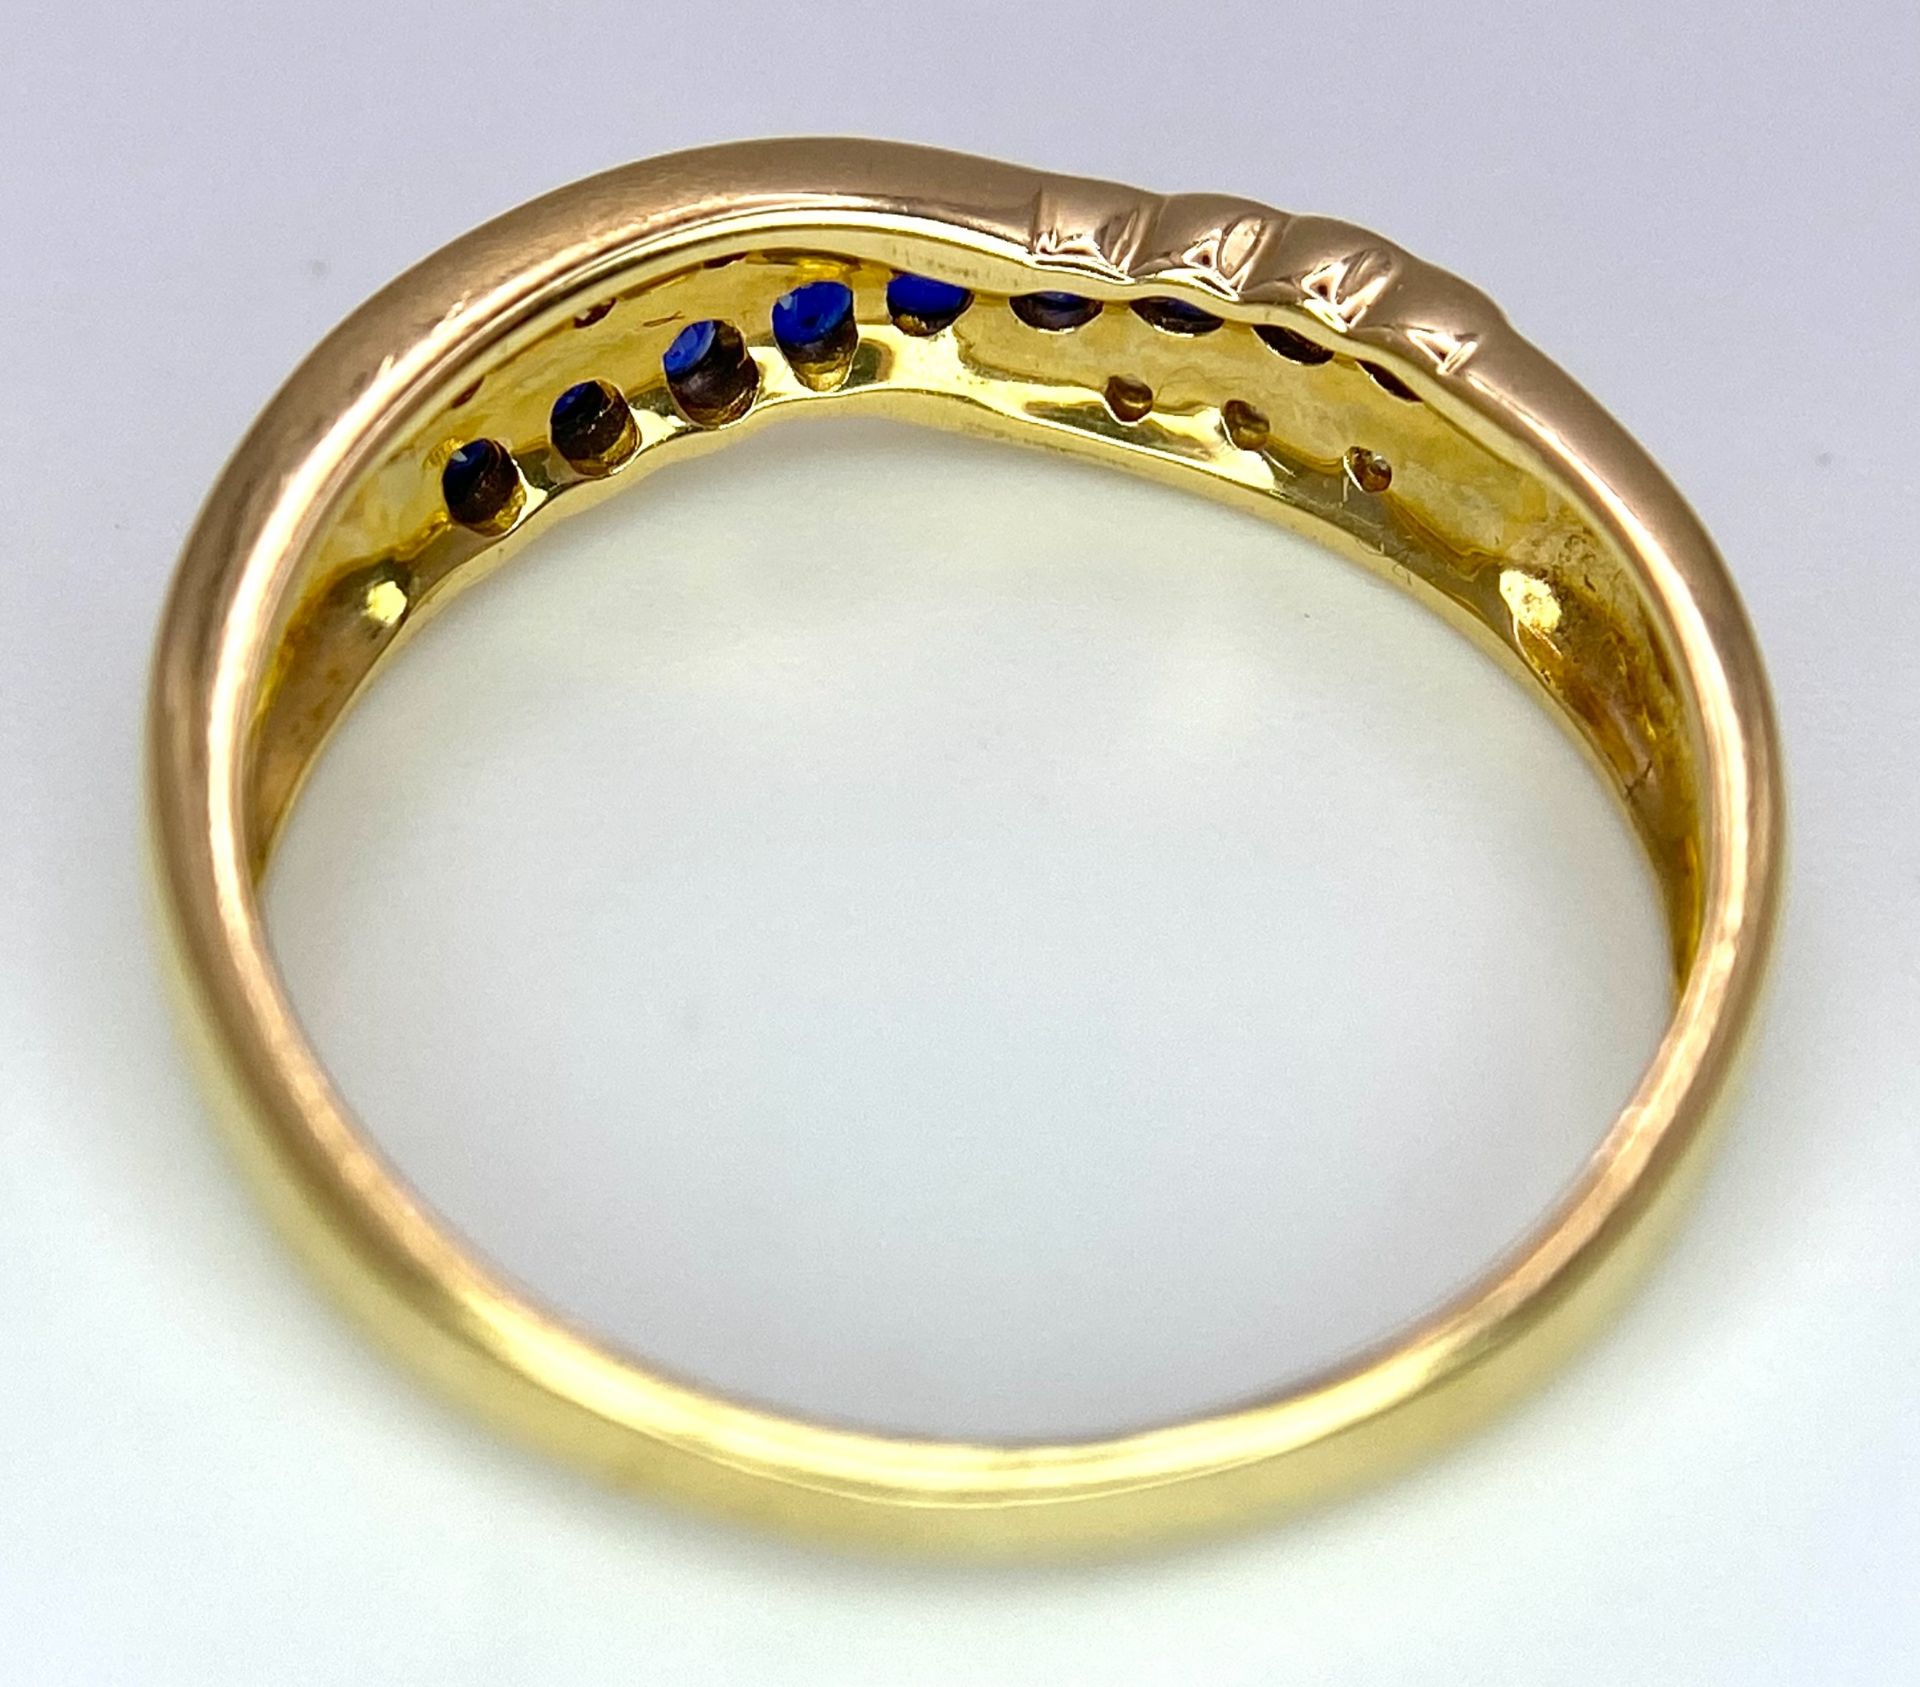 AN 18K YELLOW GOLD DIAMOND & BLUE STONE (PROBABLY SAPPHIRE) CROSSOVER RING. Size O, 2.7g total - Image 4 of 6